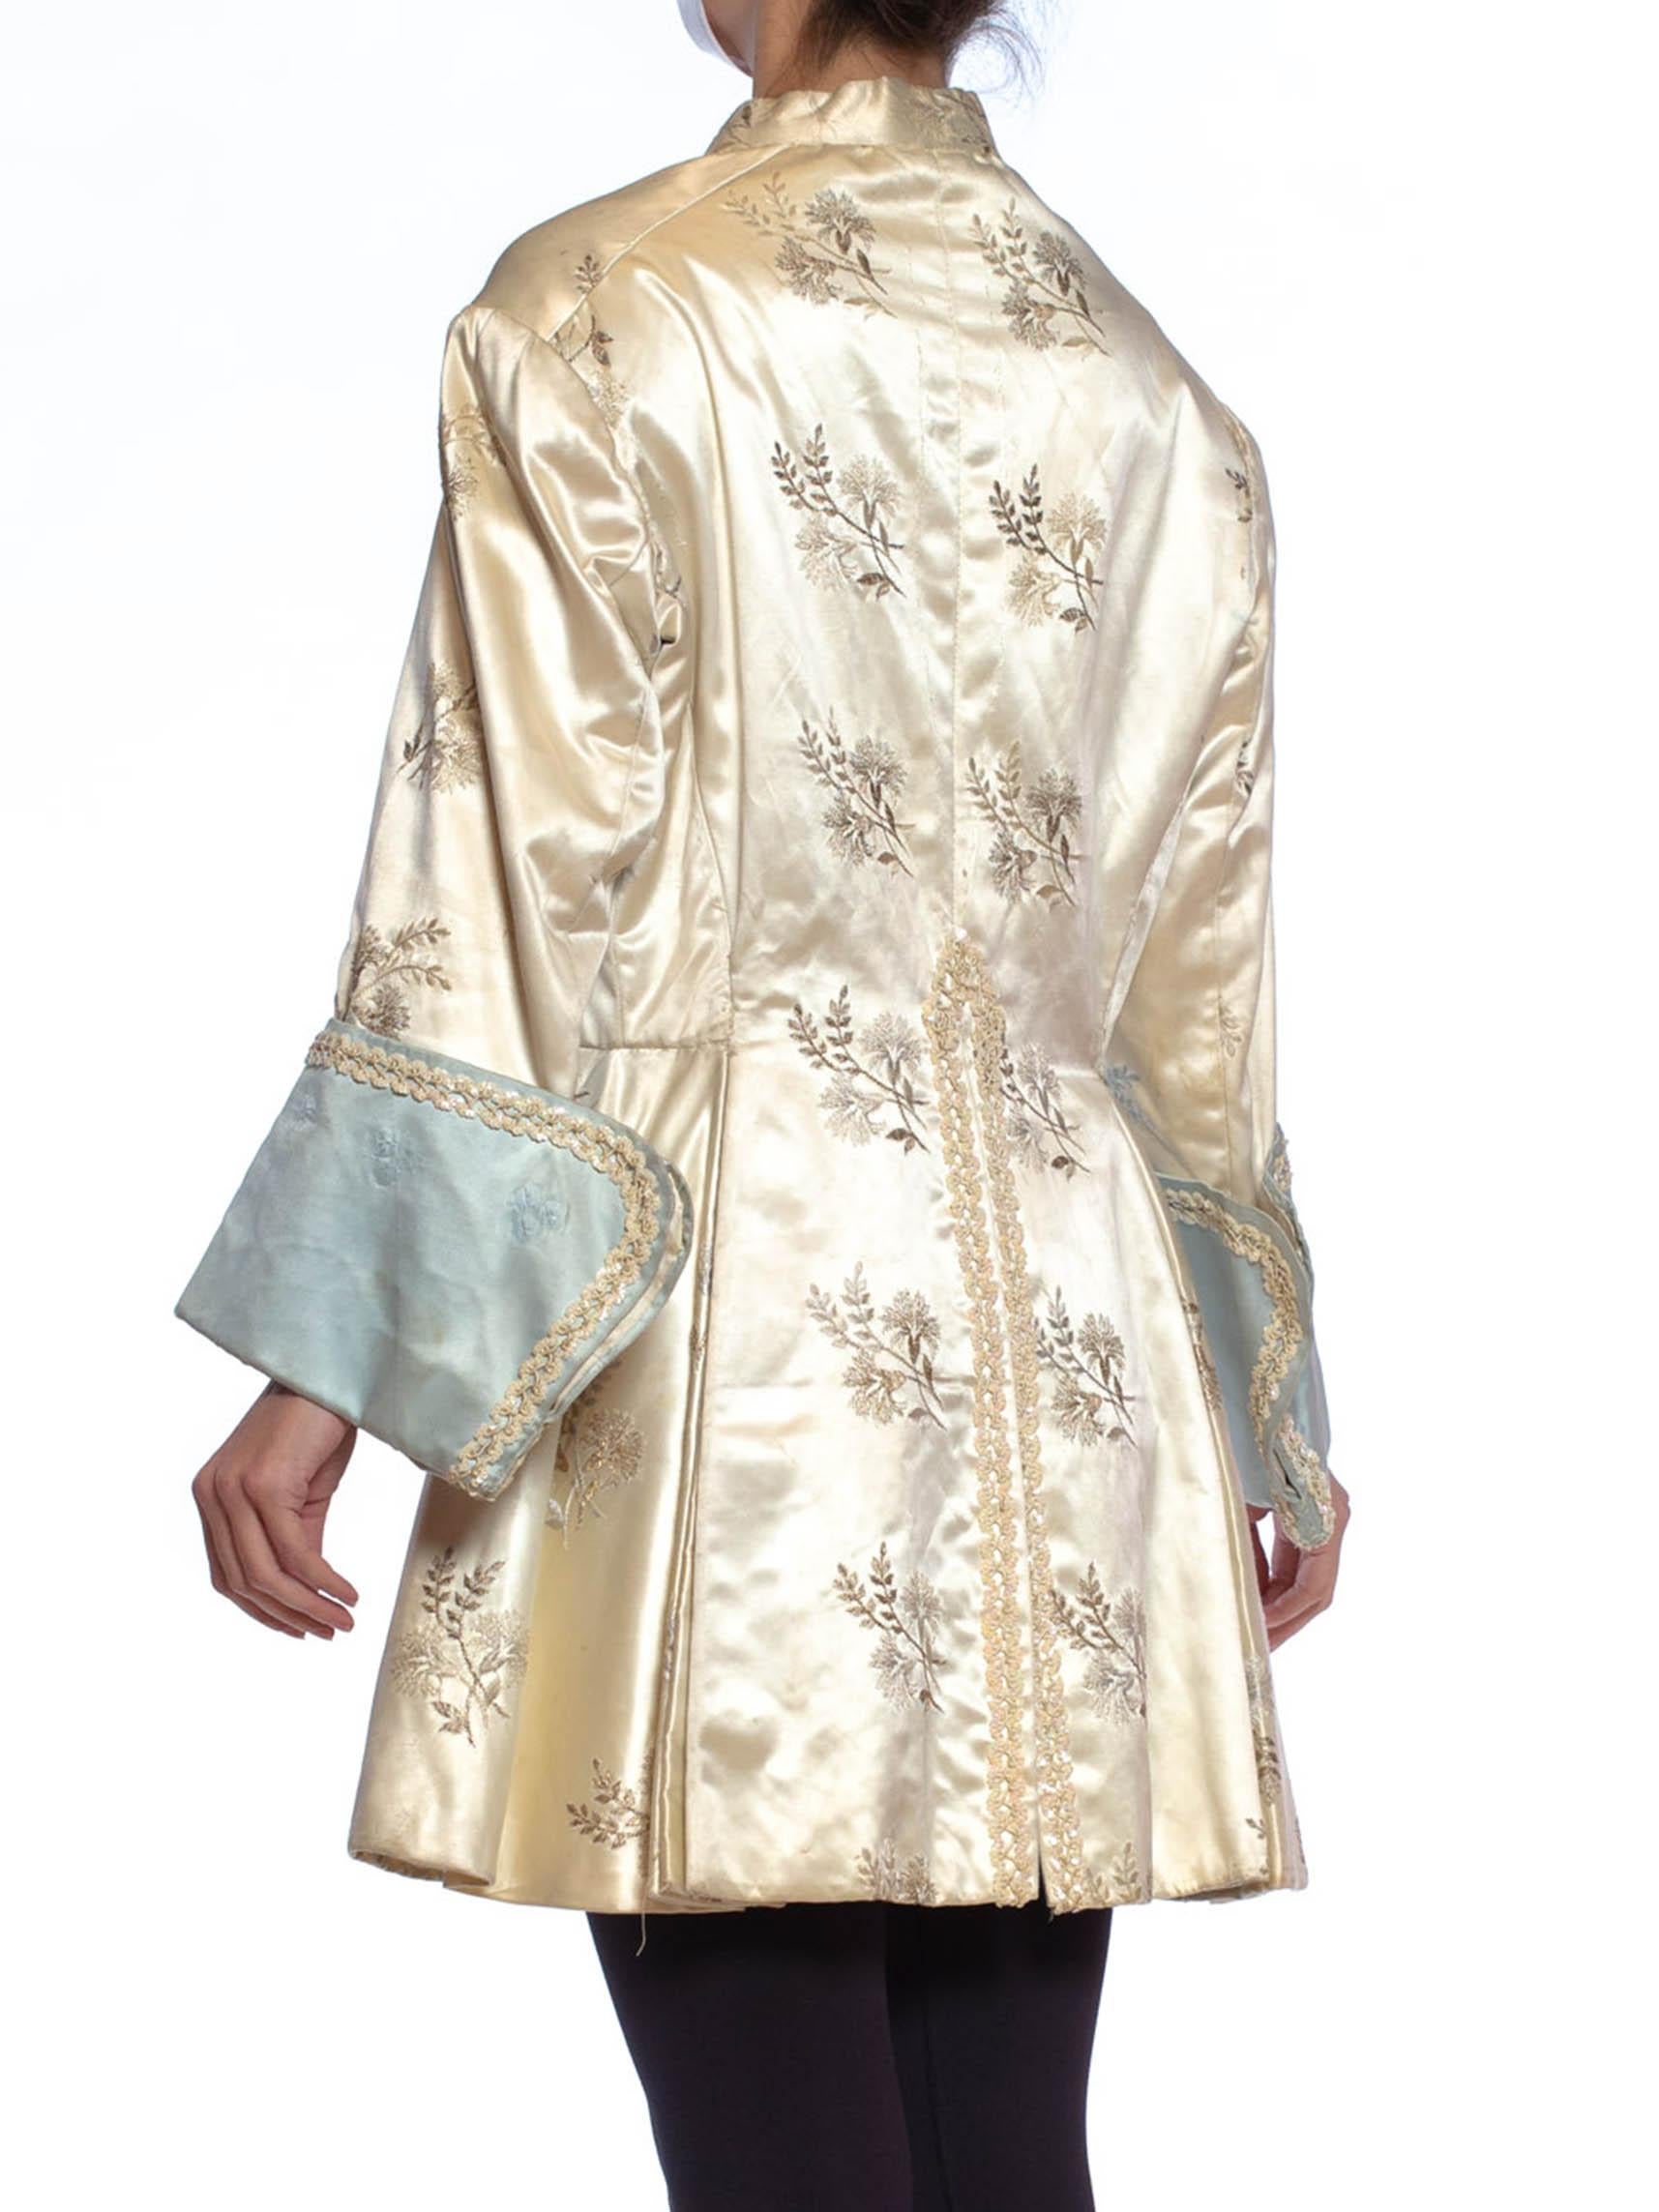 1940S White Rayon Satin Men's Floral Embroidered Frock Coat Jacket From France For Sale 5